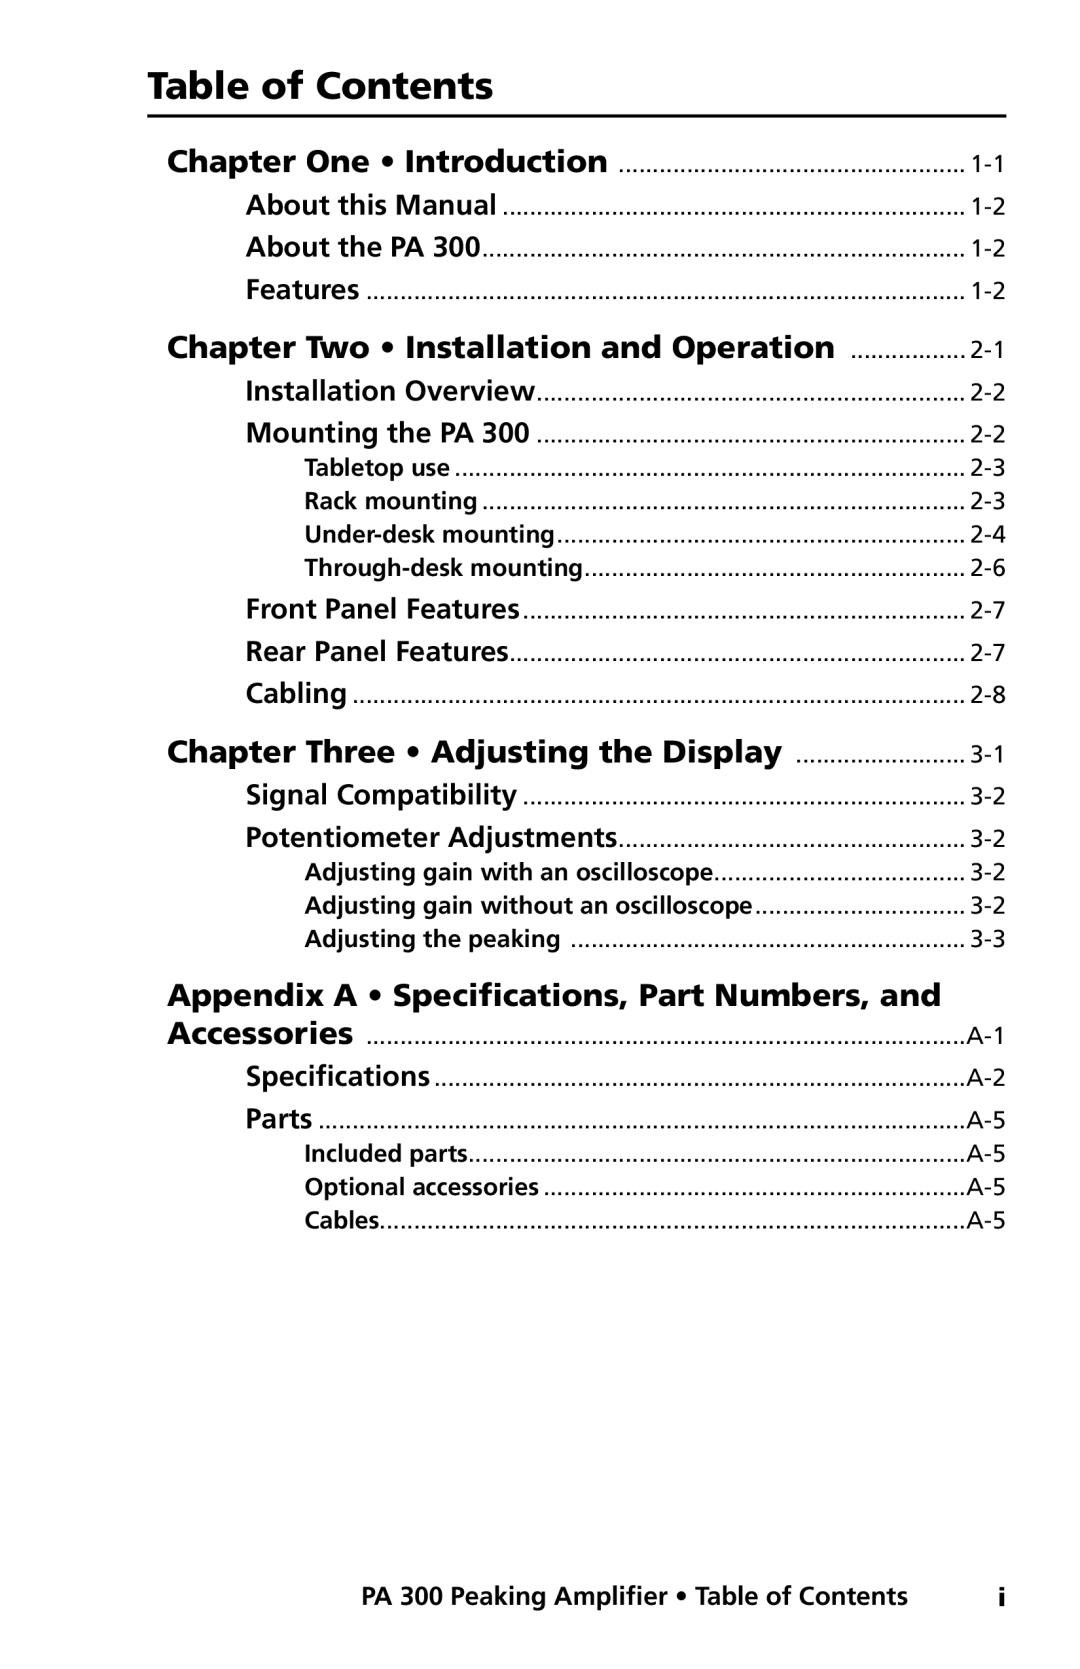 Extron electronic PA 300 Table of Contents, Chapter Two Installation and Operation, Chapter Three Adjusting the Display 